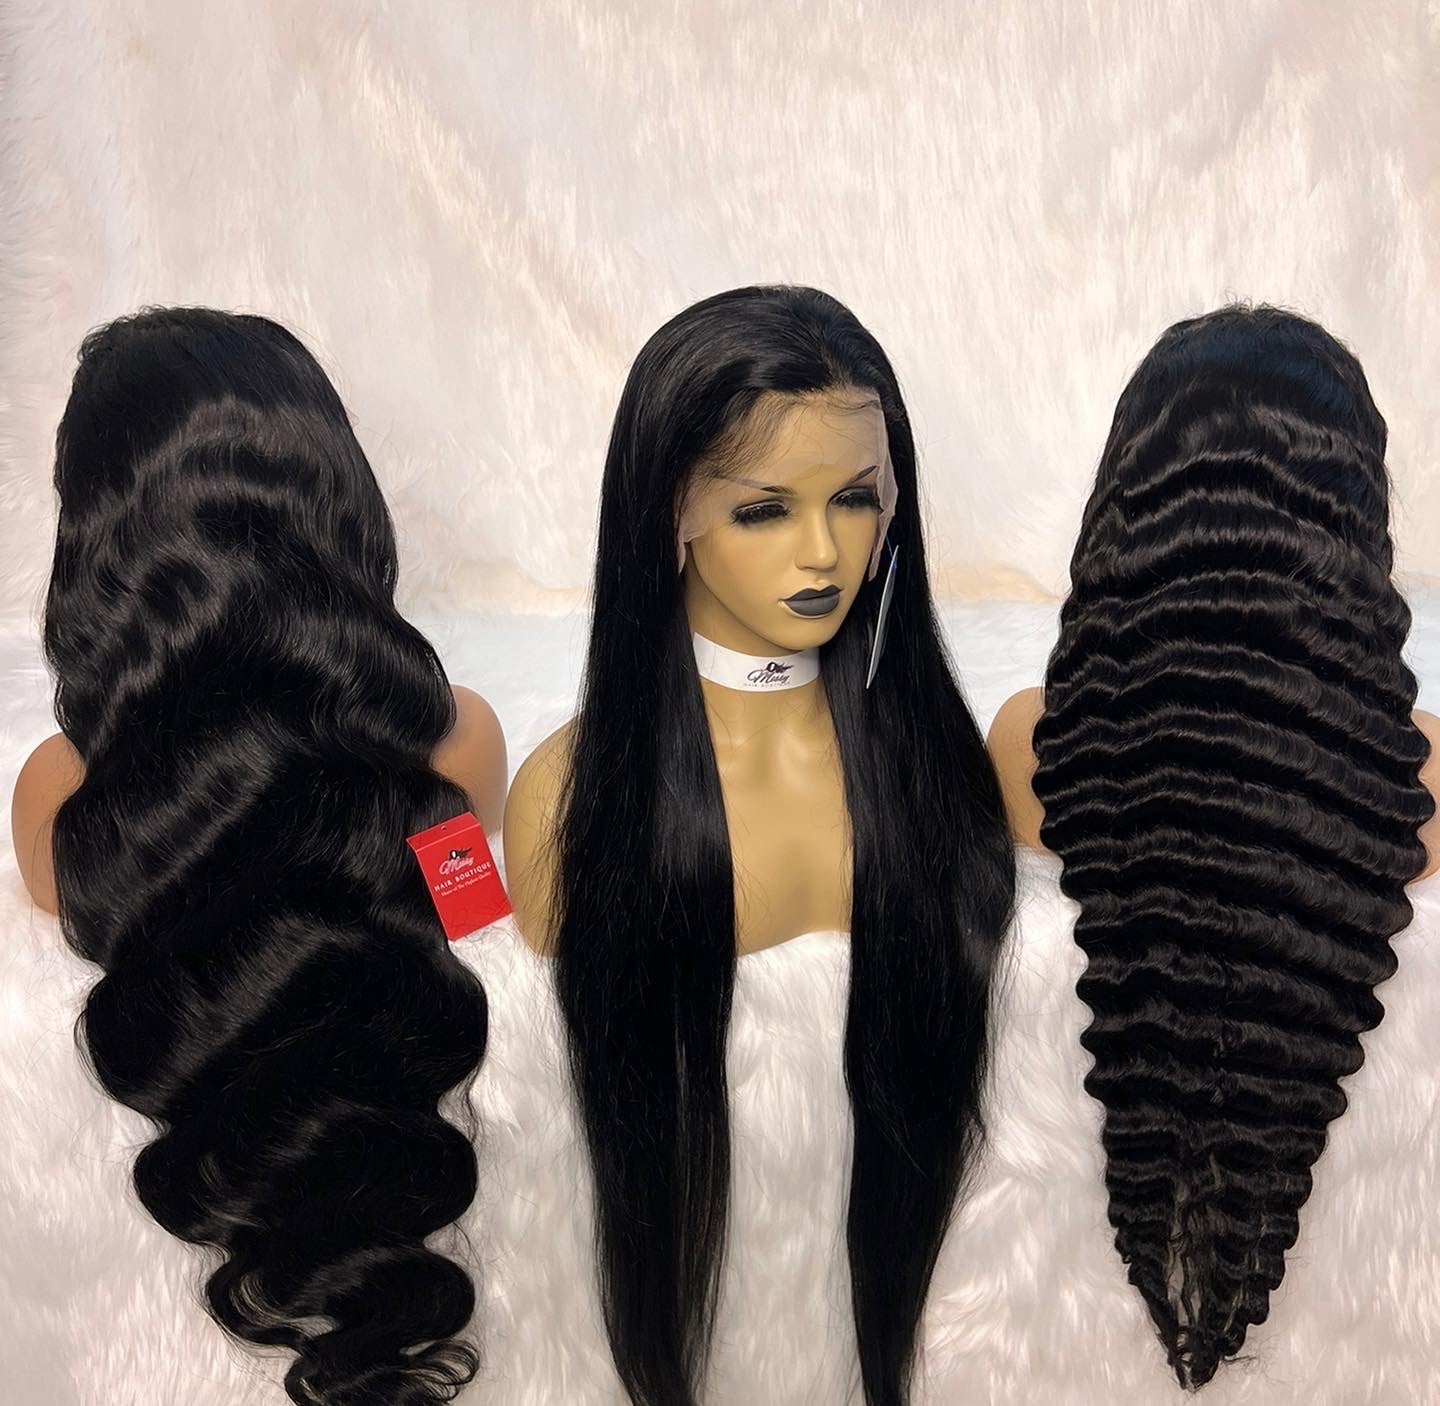 5PC WHOLESALE WIG PACKAGE DEAL